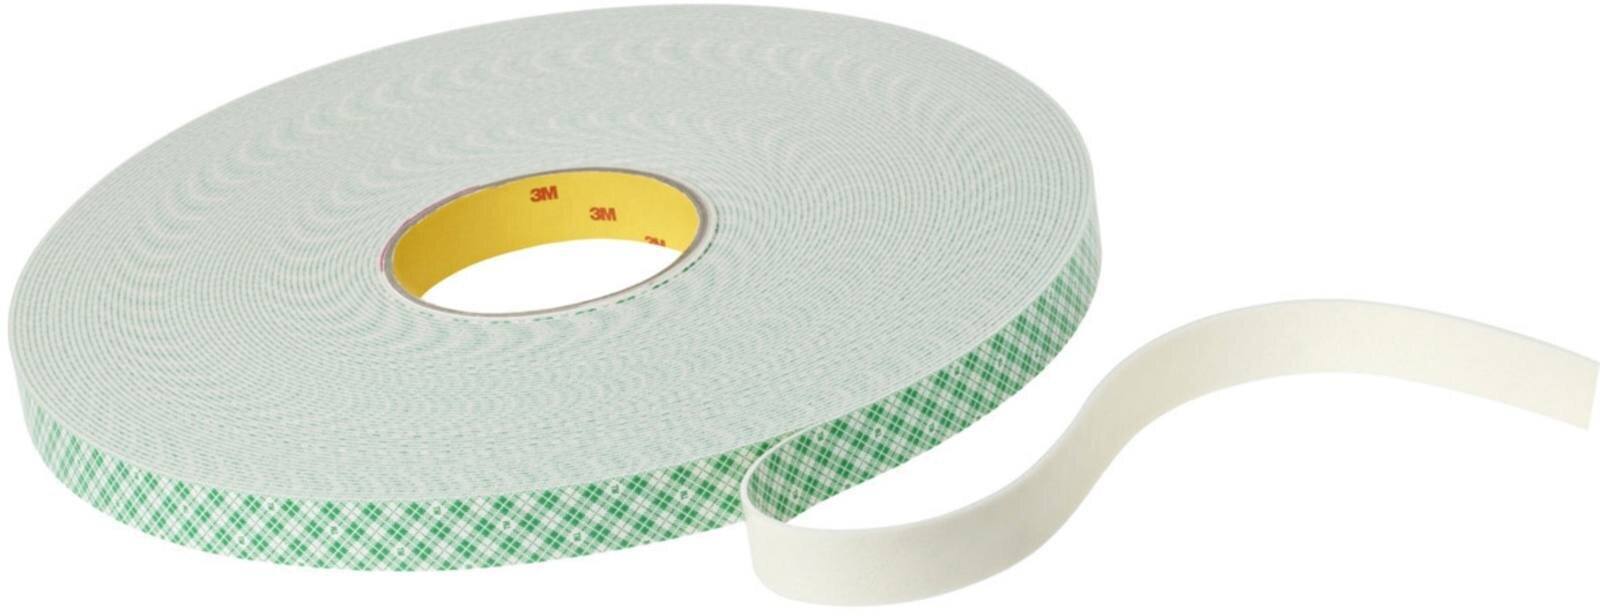 3M PU foam adhesive tape with acrylic adhesive 4026, beige, 15 mm x 33 m, 1.6 mm